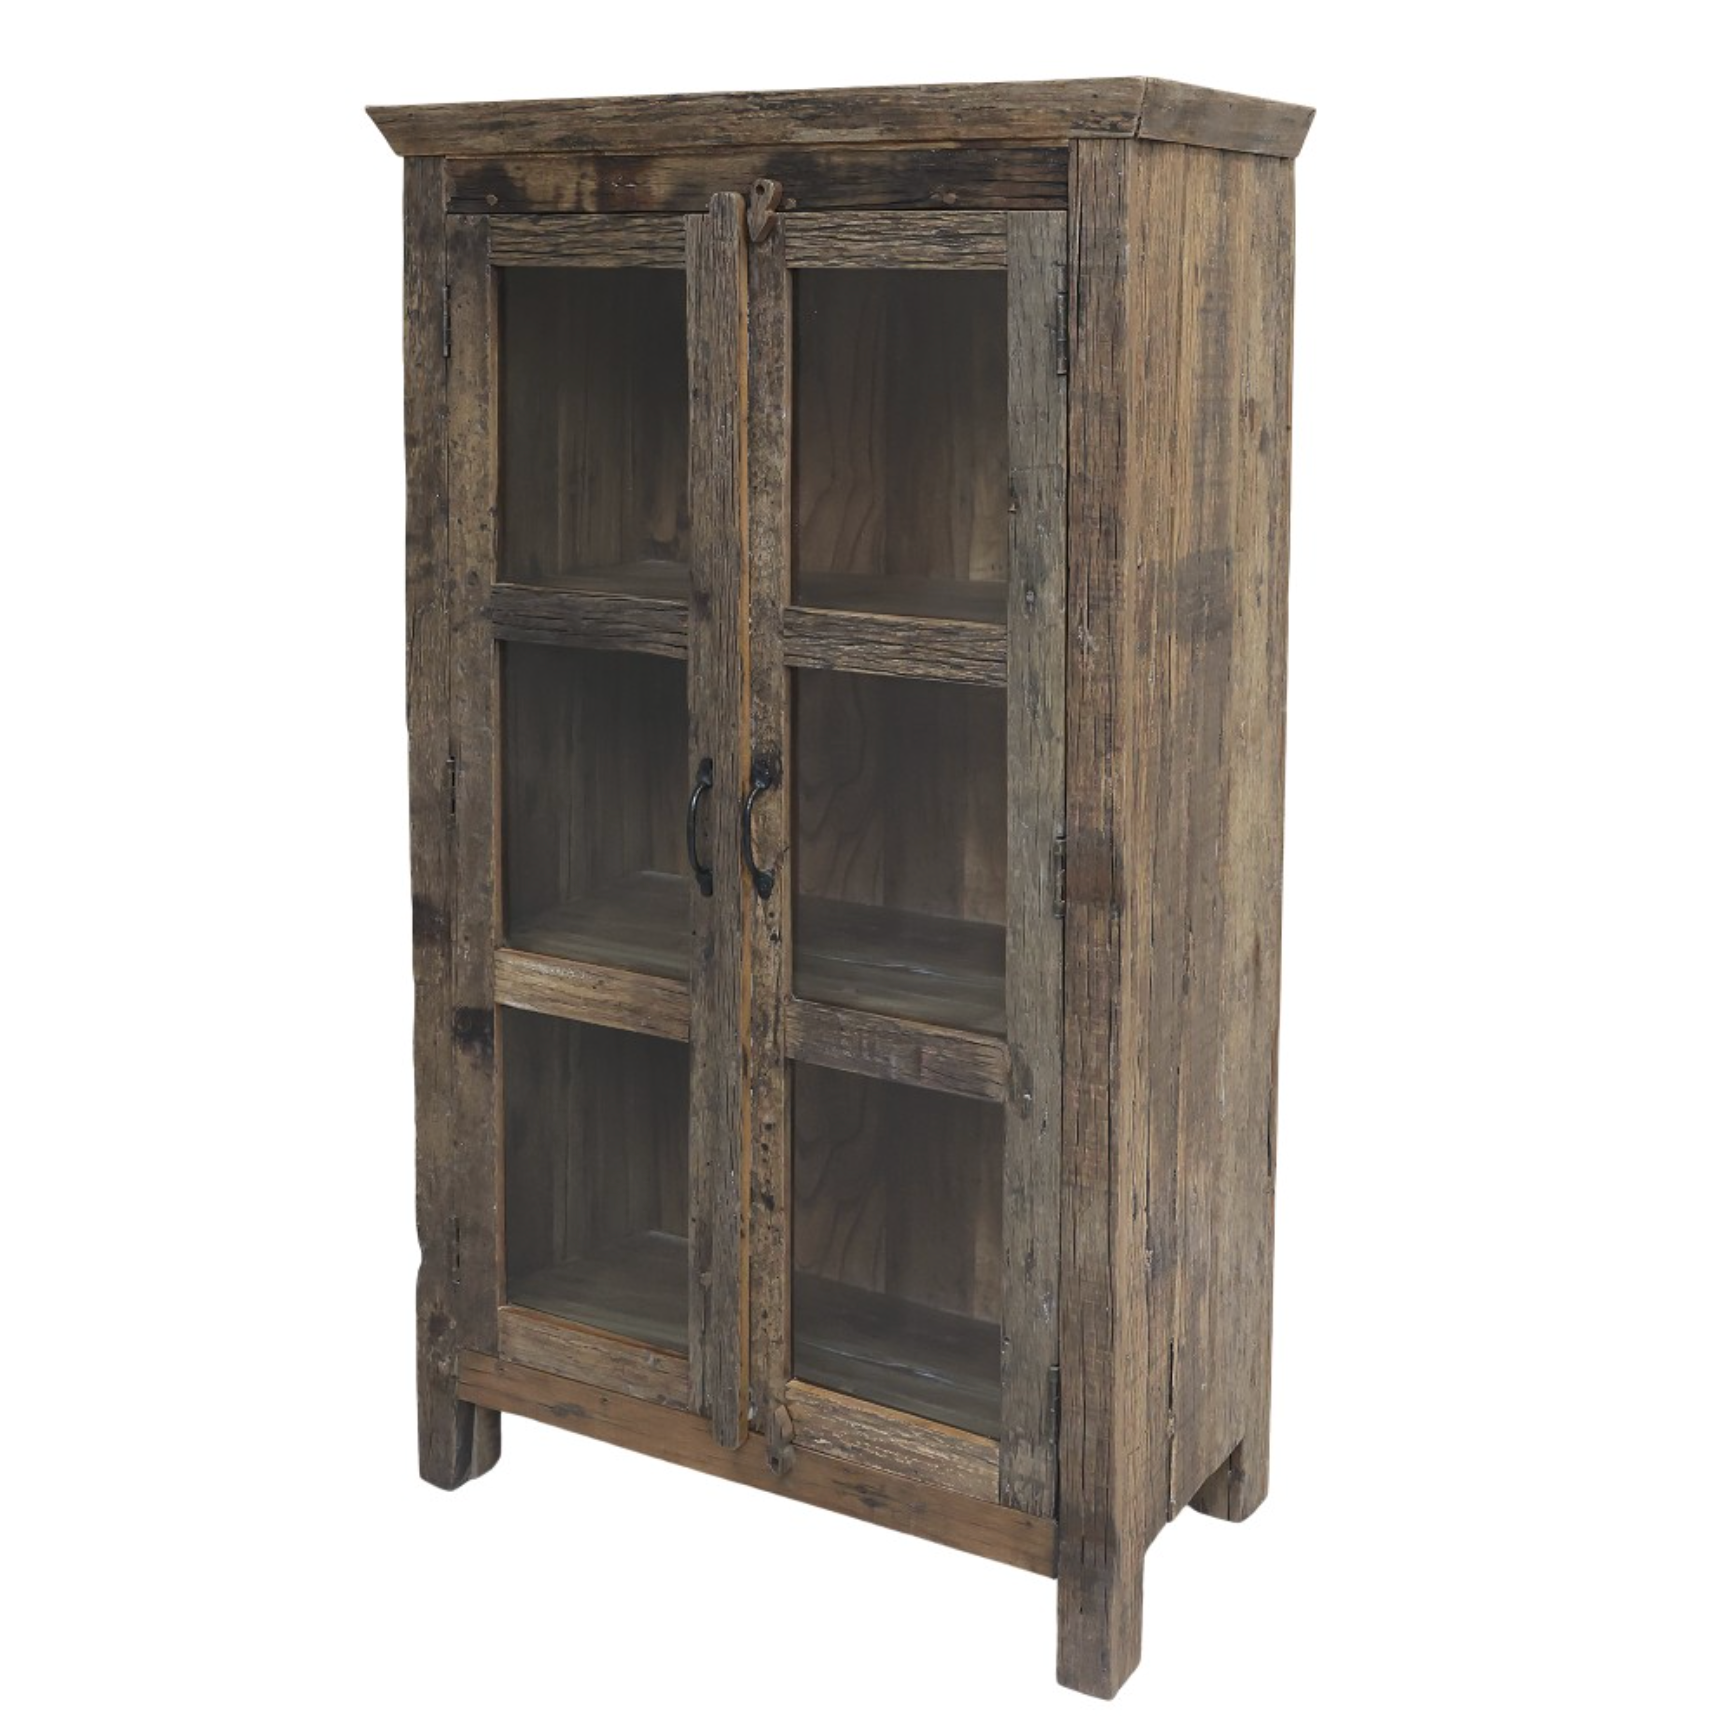 Reclaimed Wooden Cabinet with glass doors.